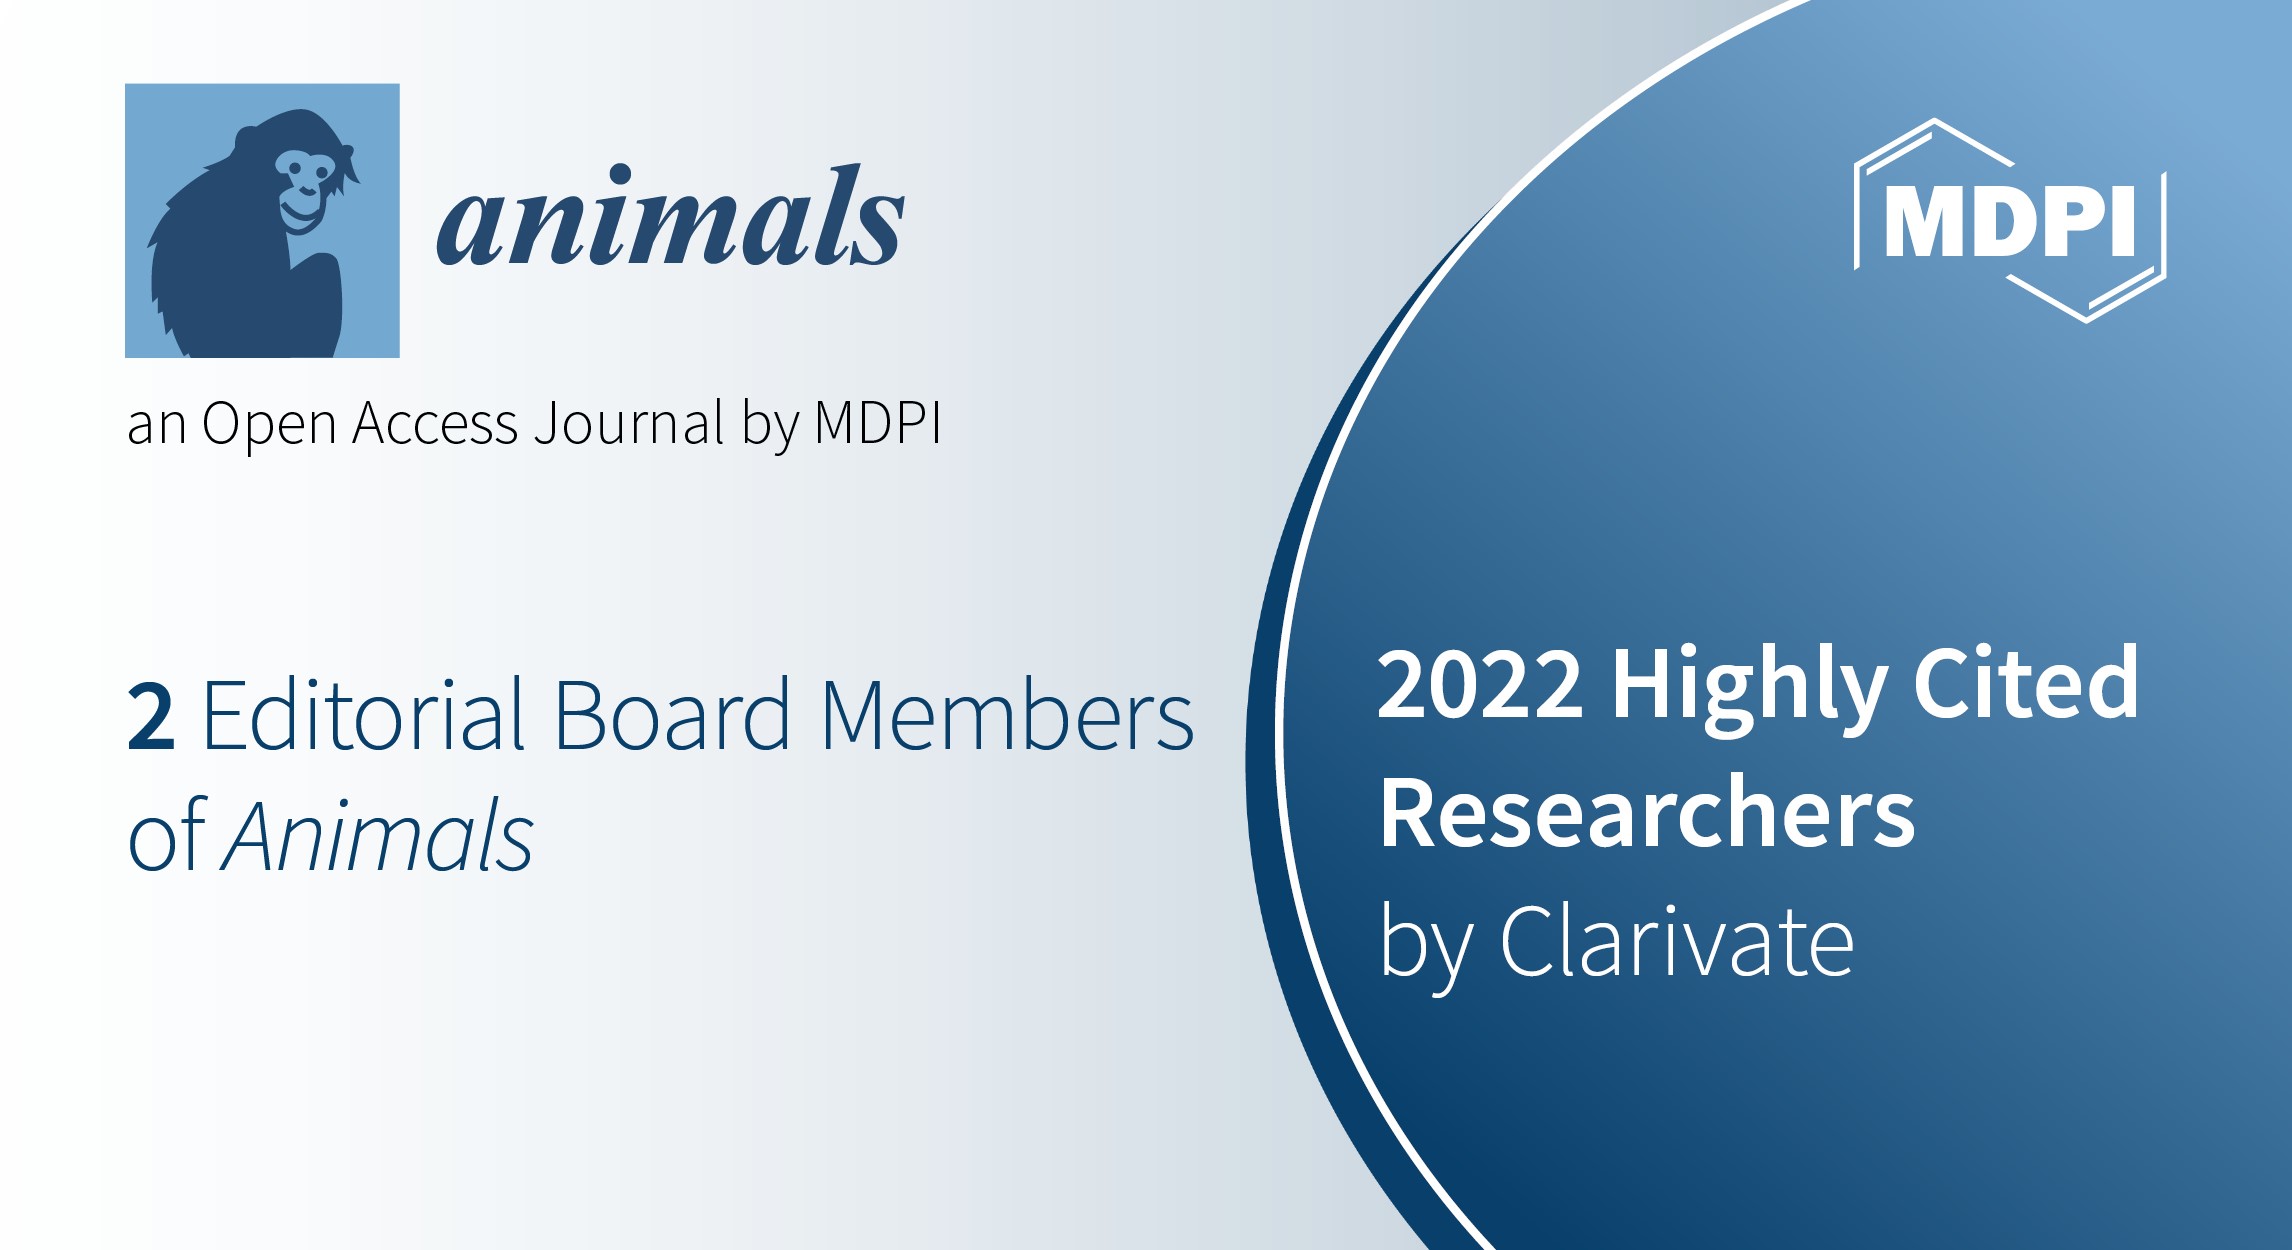 Editorial Board Members from Animals Featured in the 2022 Highly Cited  Researchers List Published by Clarivate